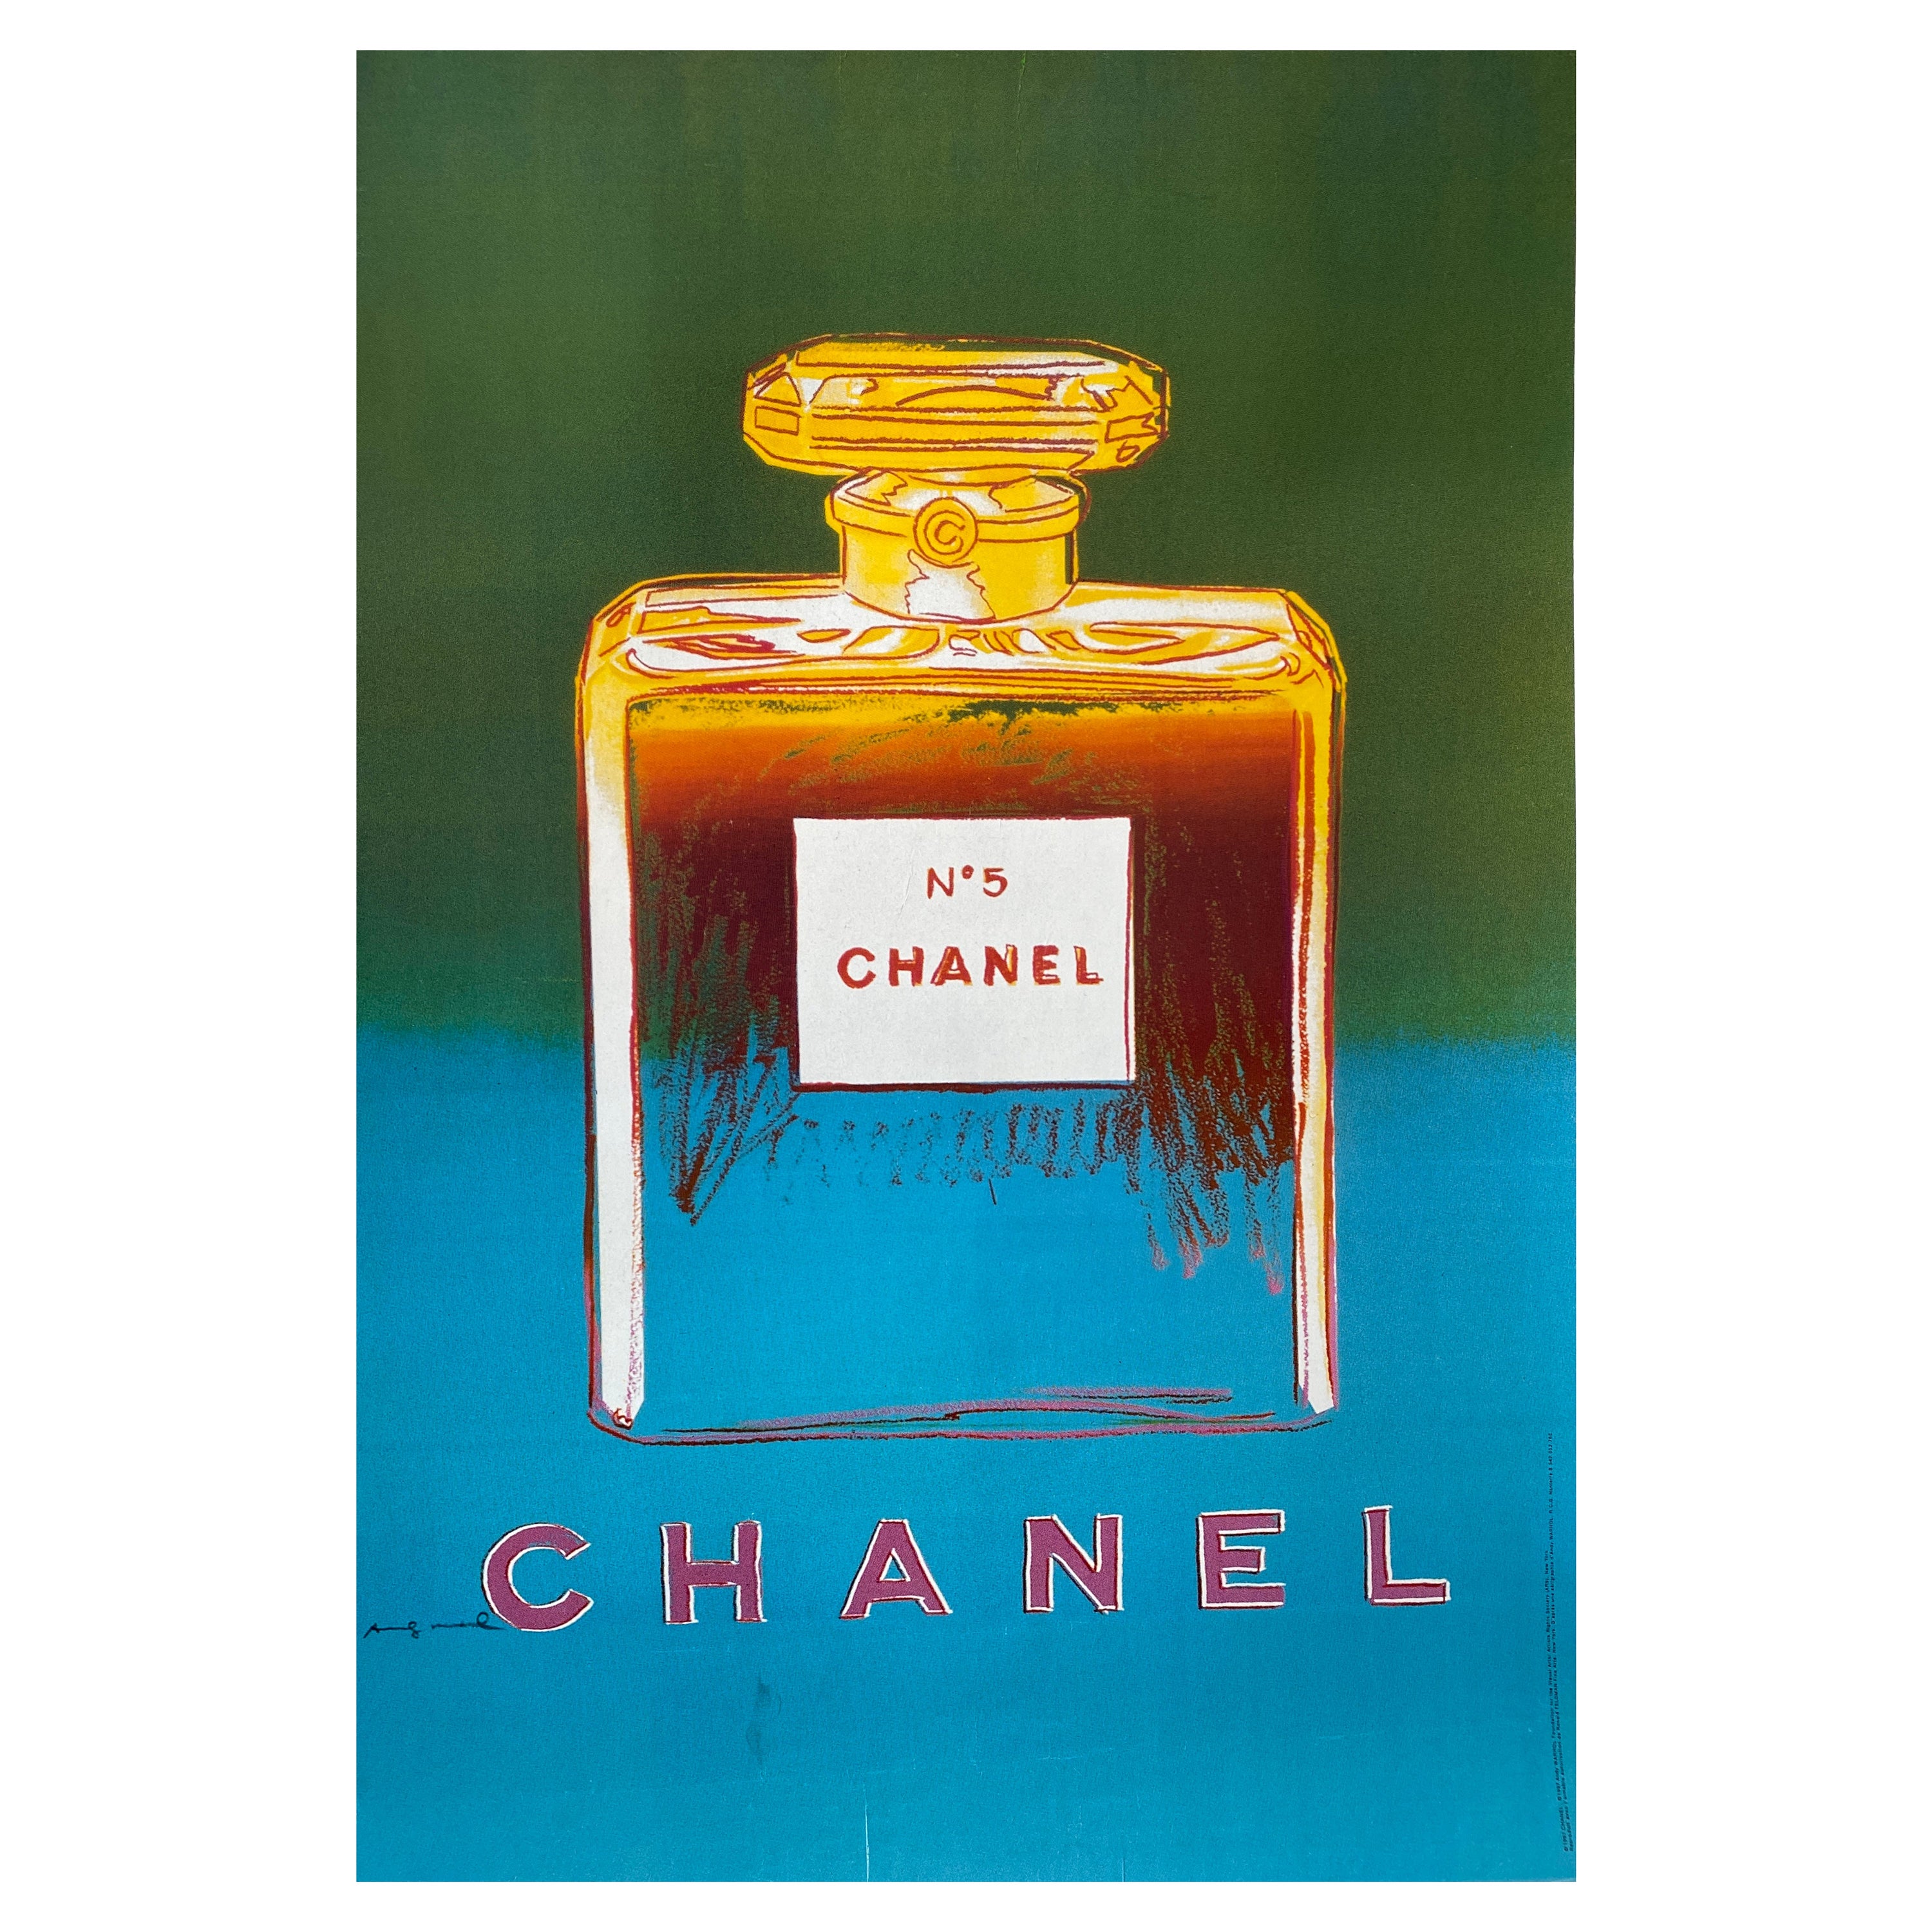 Original Vintage Fashion Poster, 'Chanel' by Andy Warhol, 1997